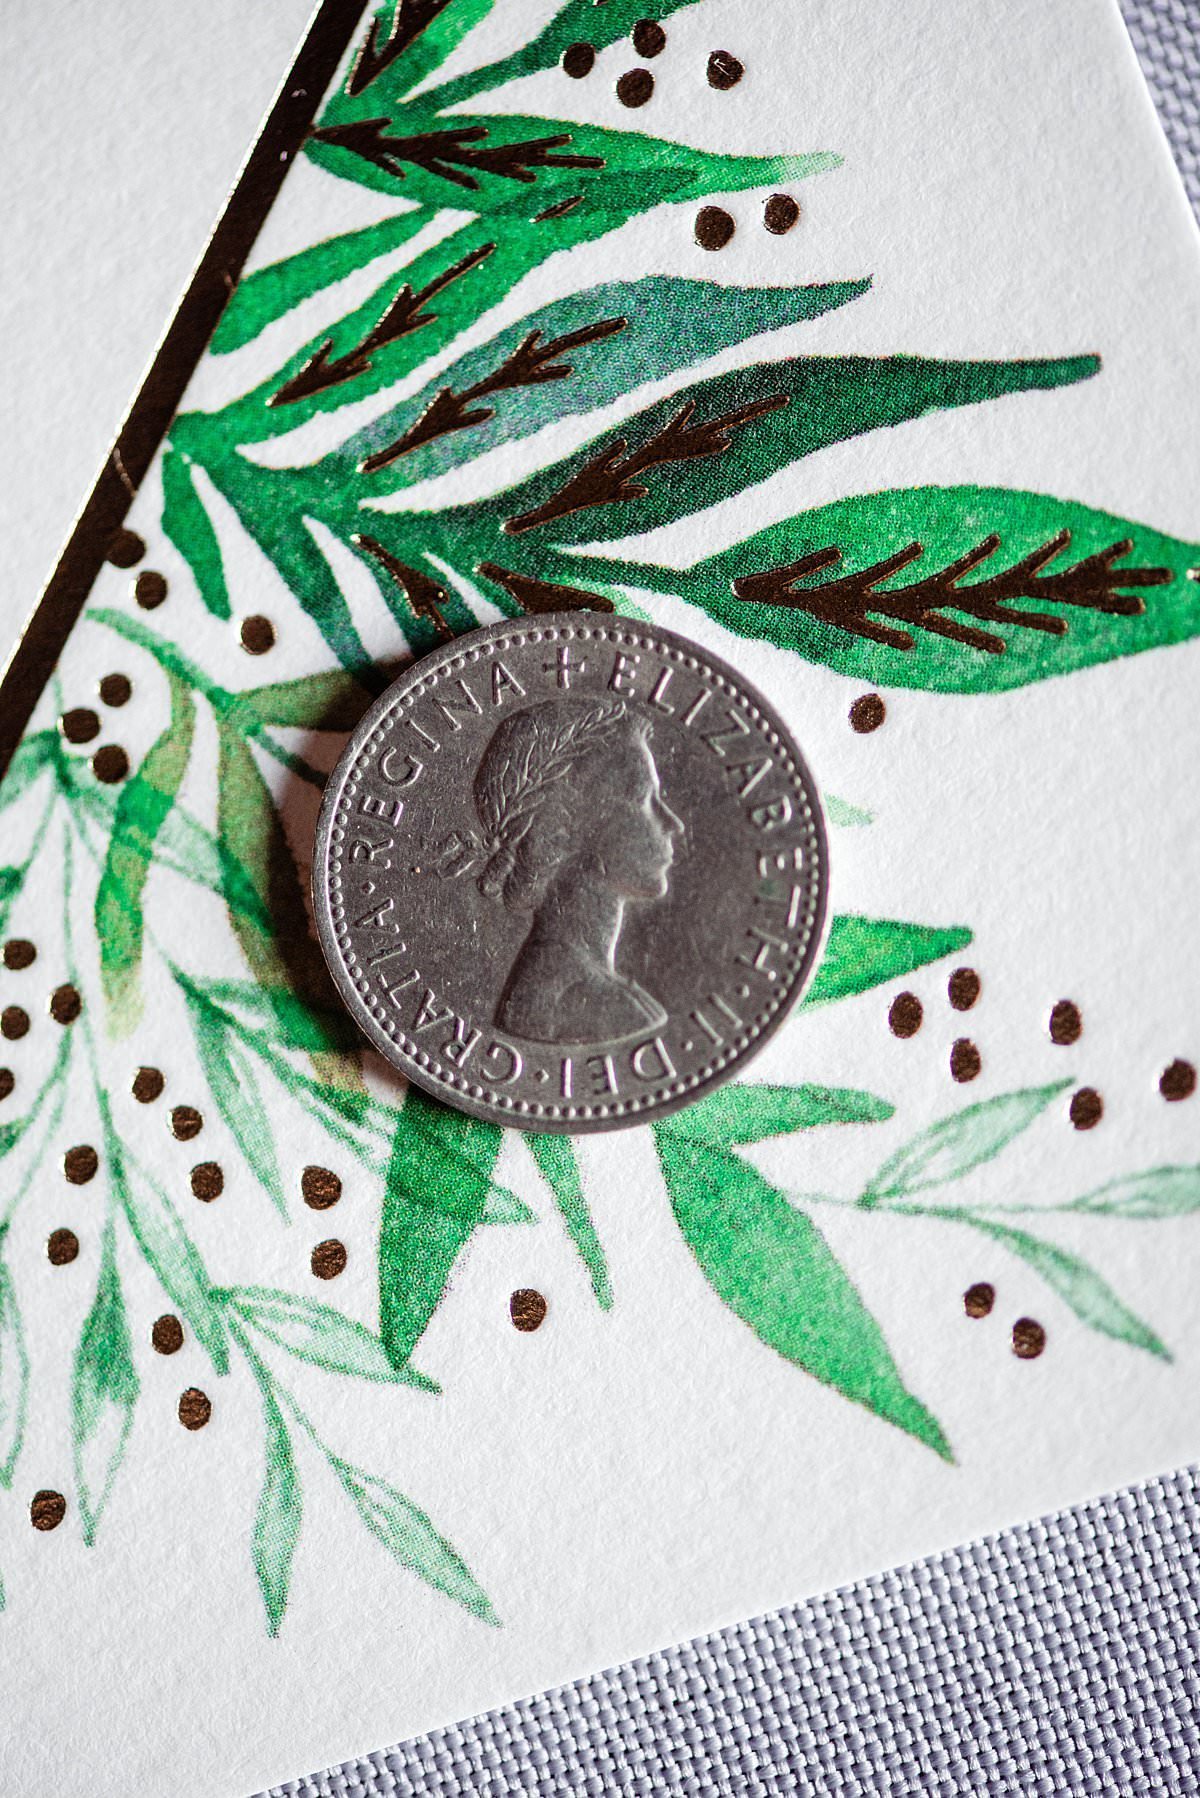 Silver sixpence on top if a greenery stationary design